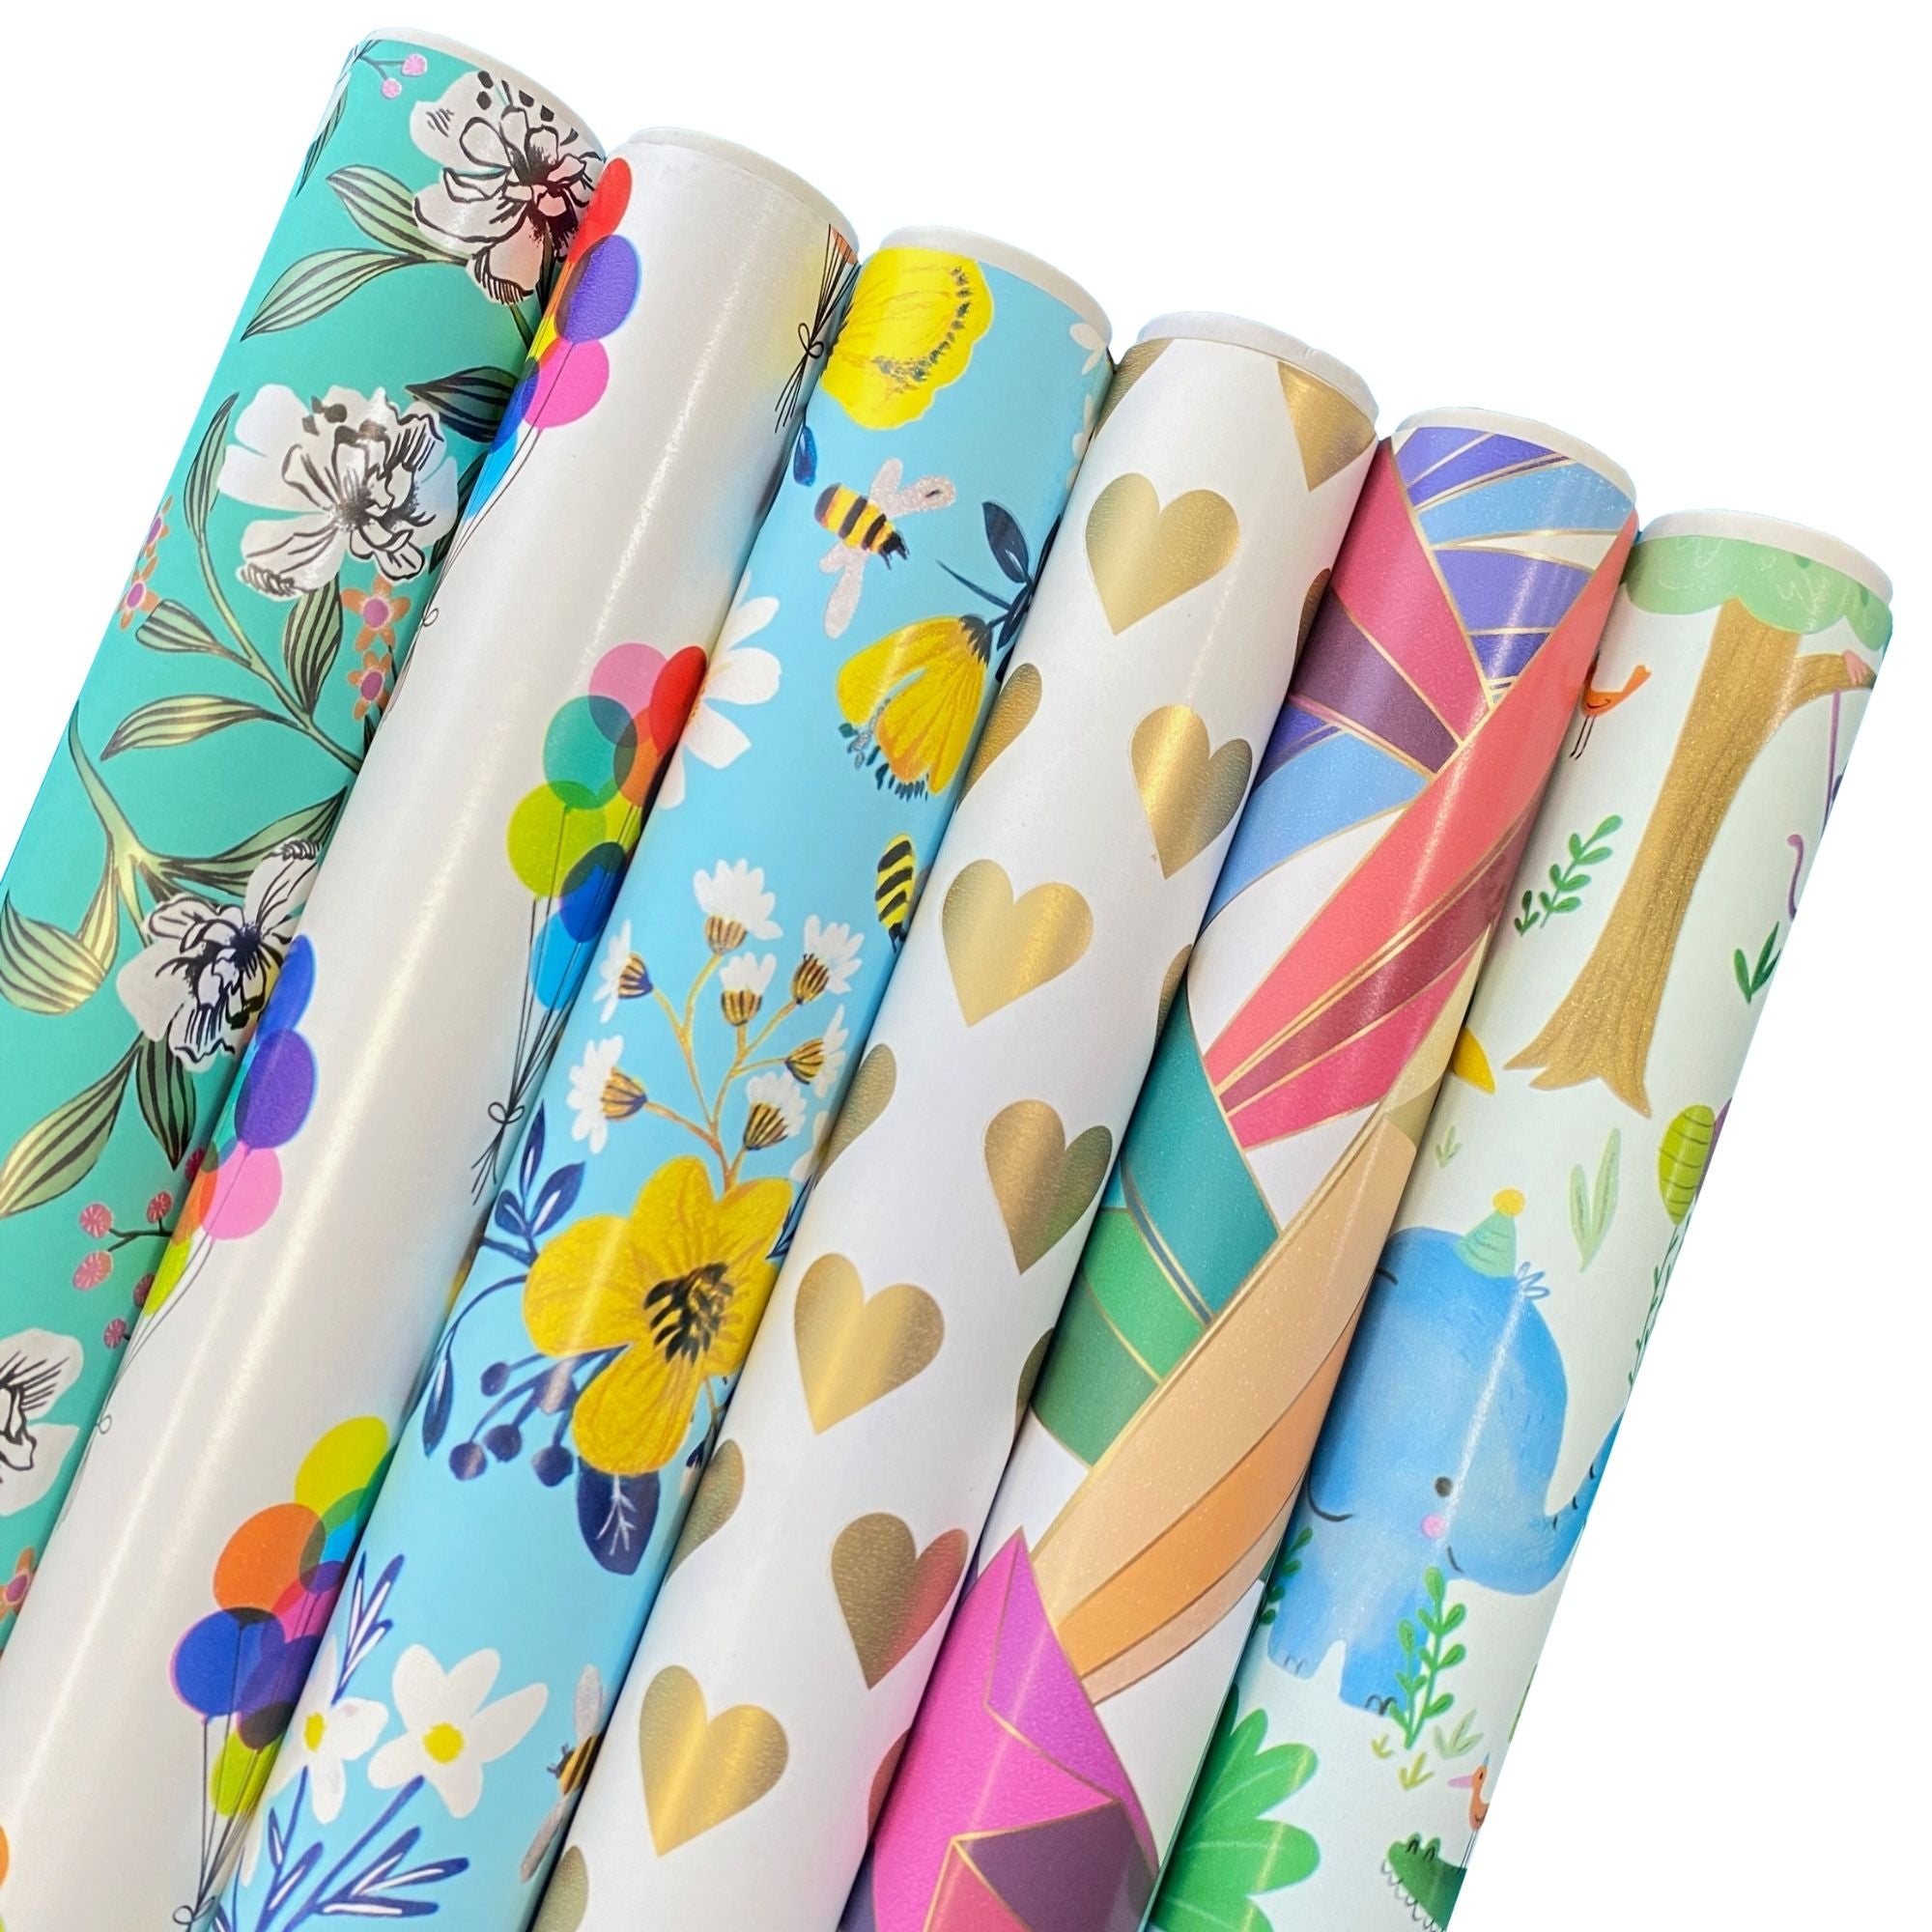 Assorted Wrapping Paper Roll Bundle (12.5 sq ft per roll, 75 total sq ft), 6 Pack